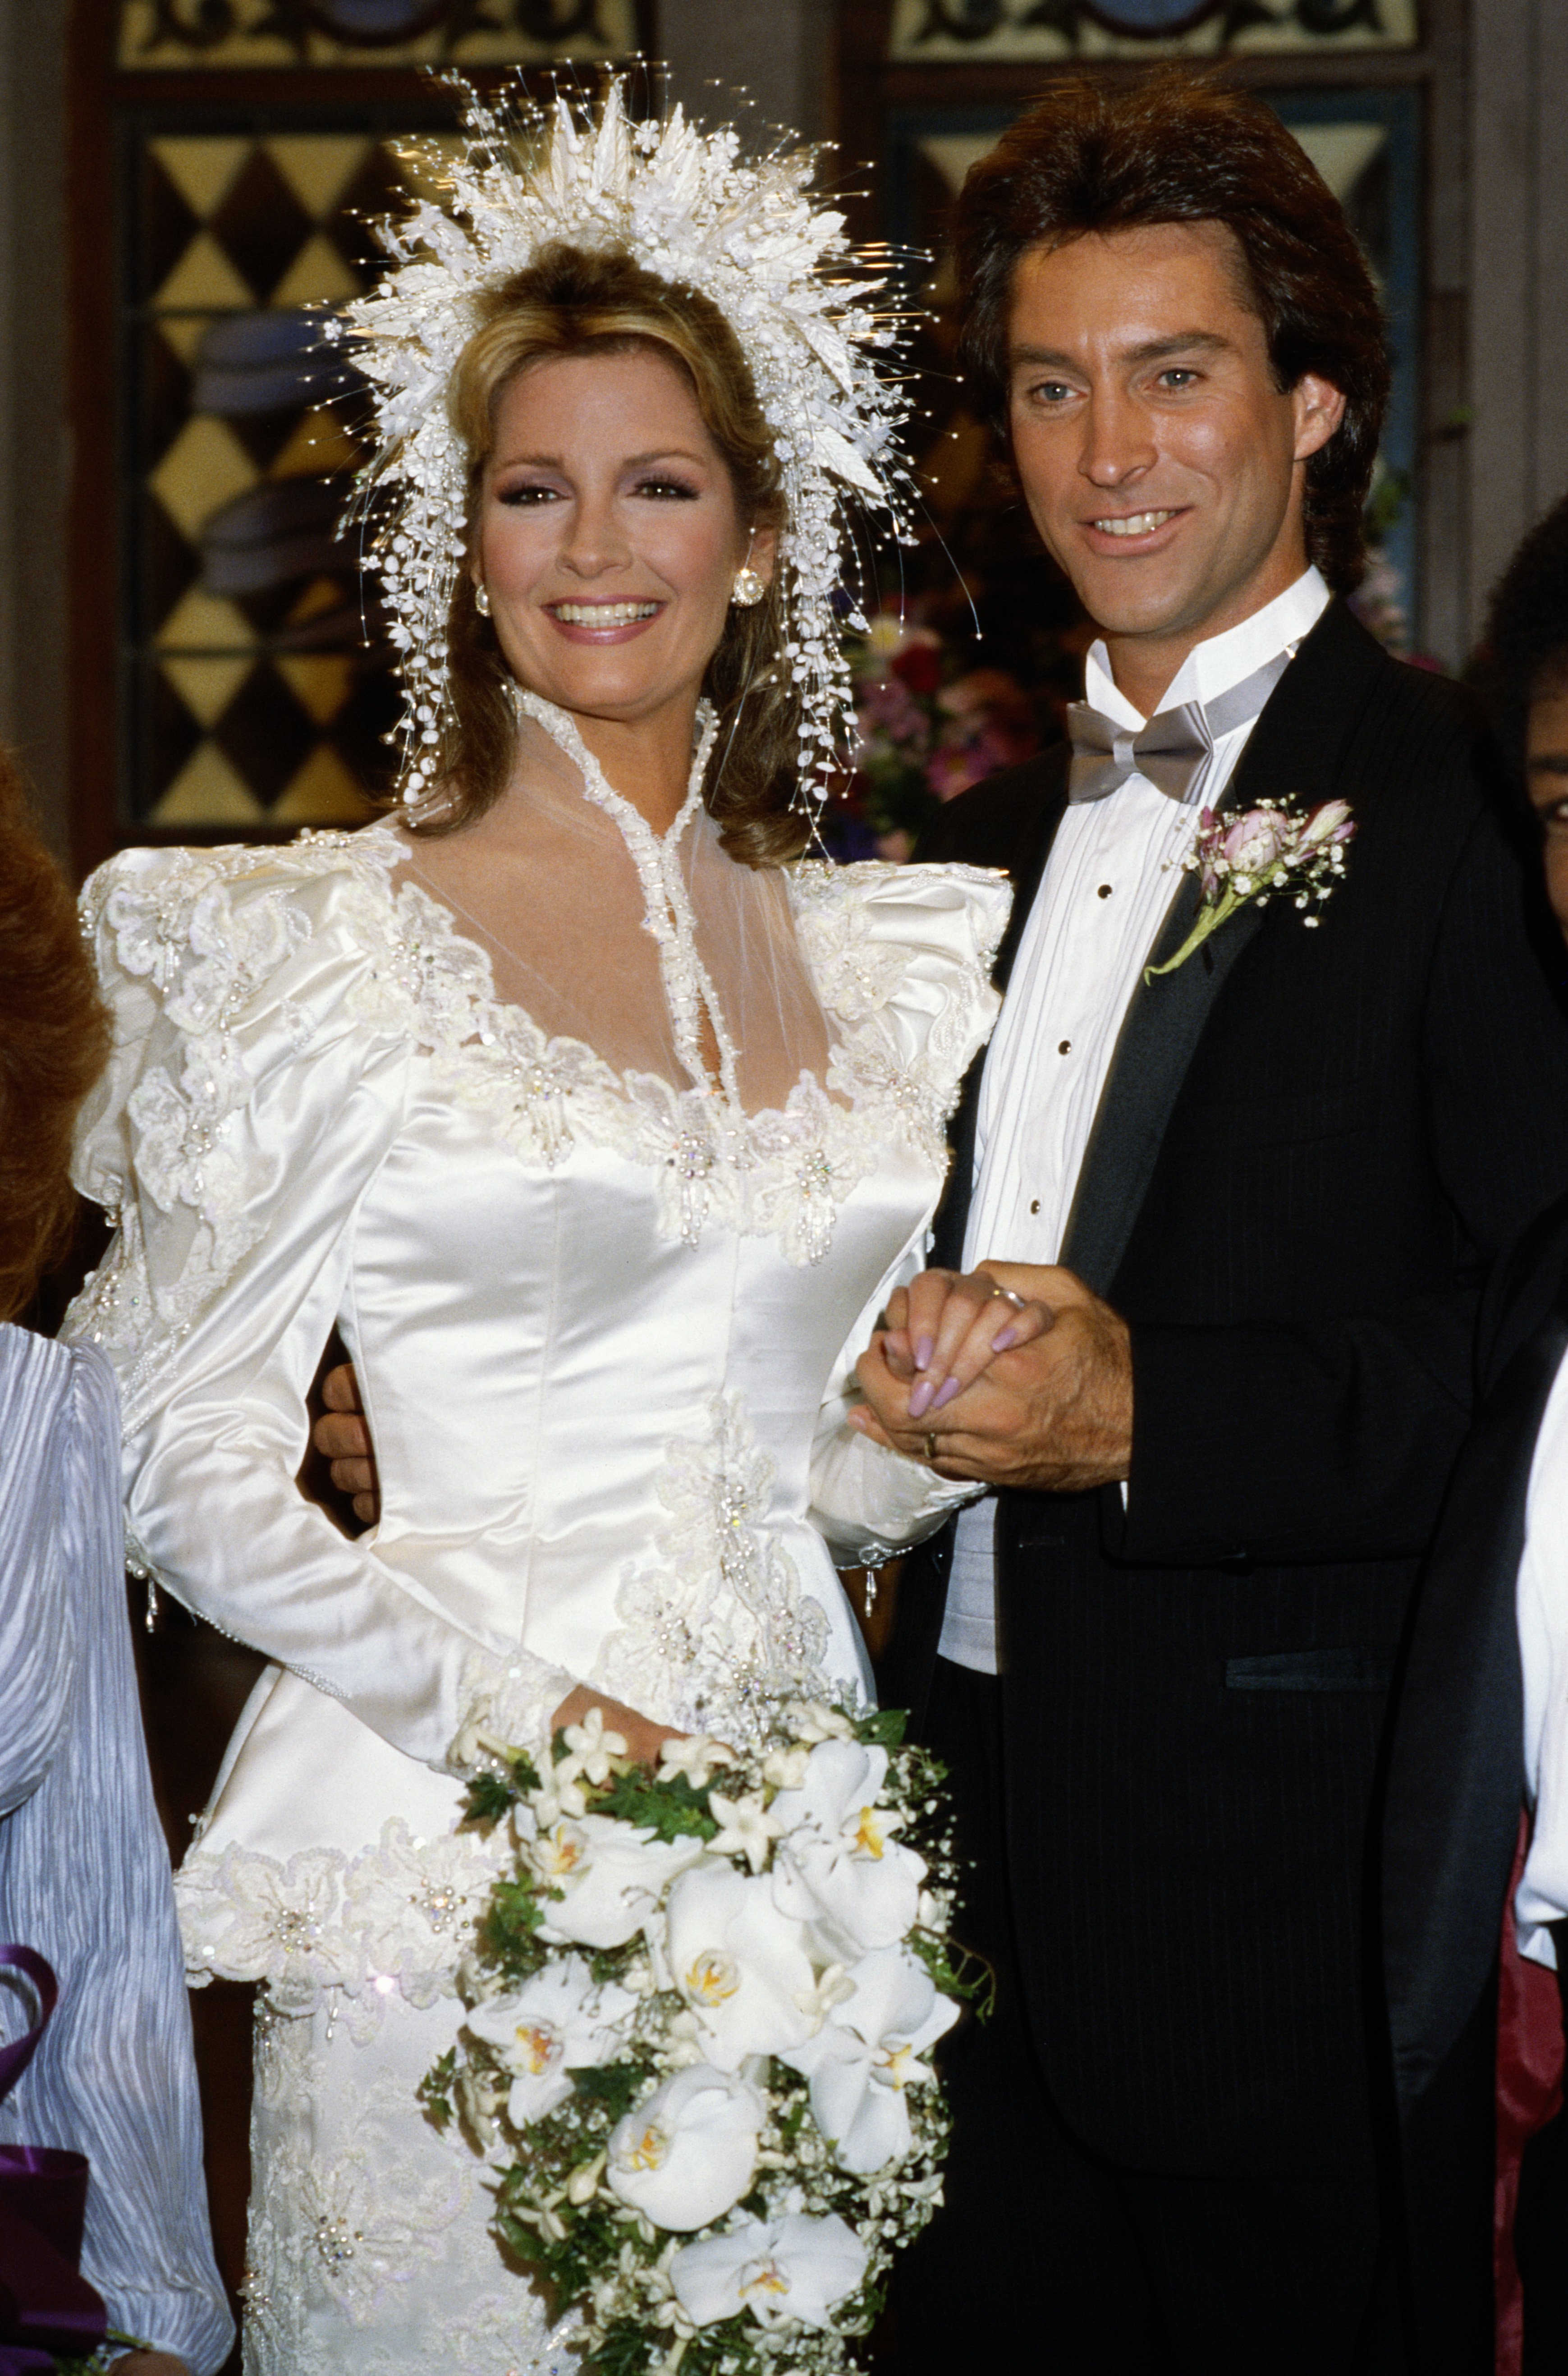 Actress Deidre Hall starring as Dr. Marlena Evans with actor Drake Hogestyn as John Black in a wedding scene from the soap opera "Days of Our Lives," on January 1, 2005 ┃Source: Getty Images